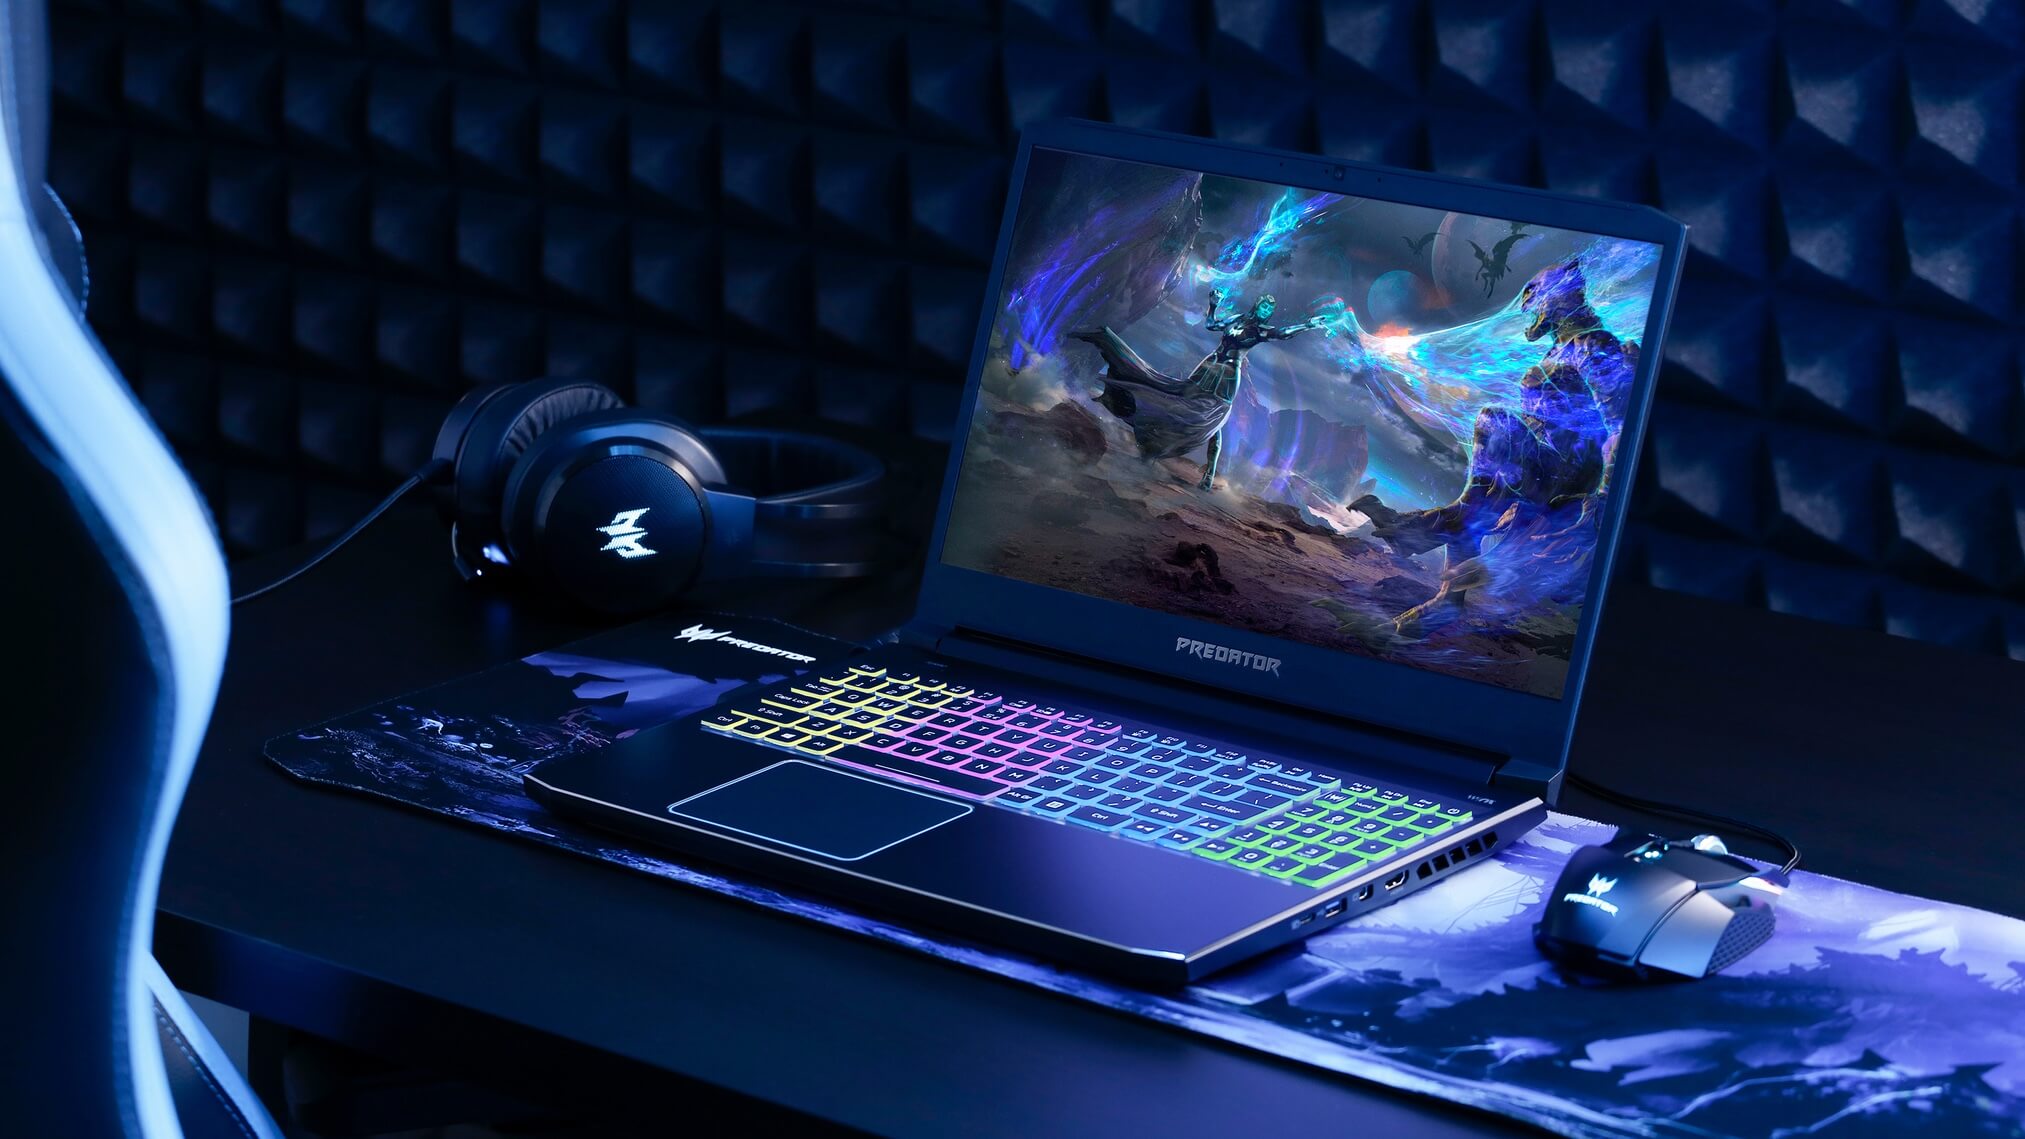 Gaming laptop combo: Intel and Nvidia partner to drive PC gaming on the go